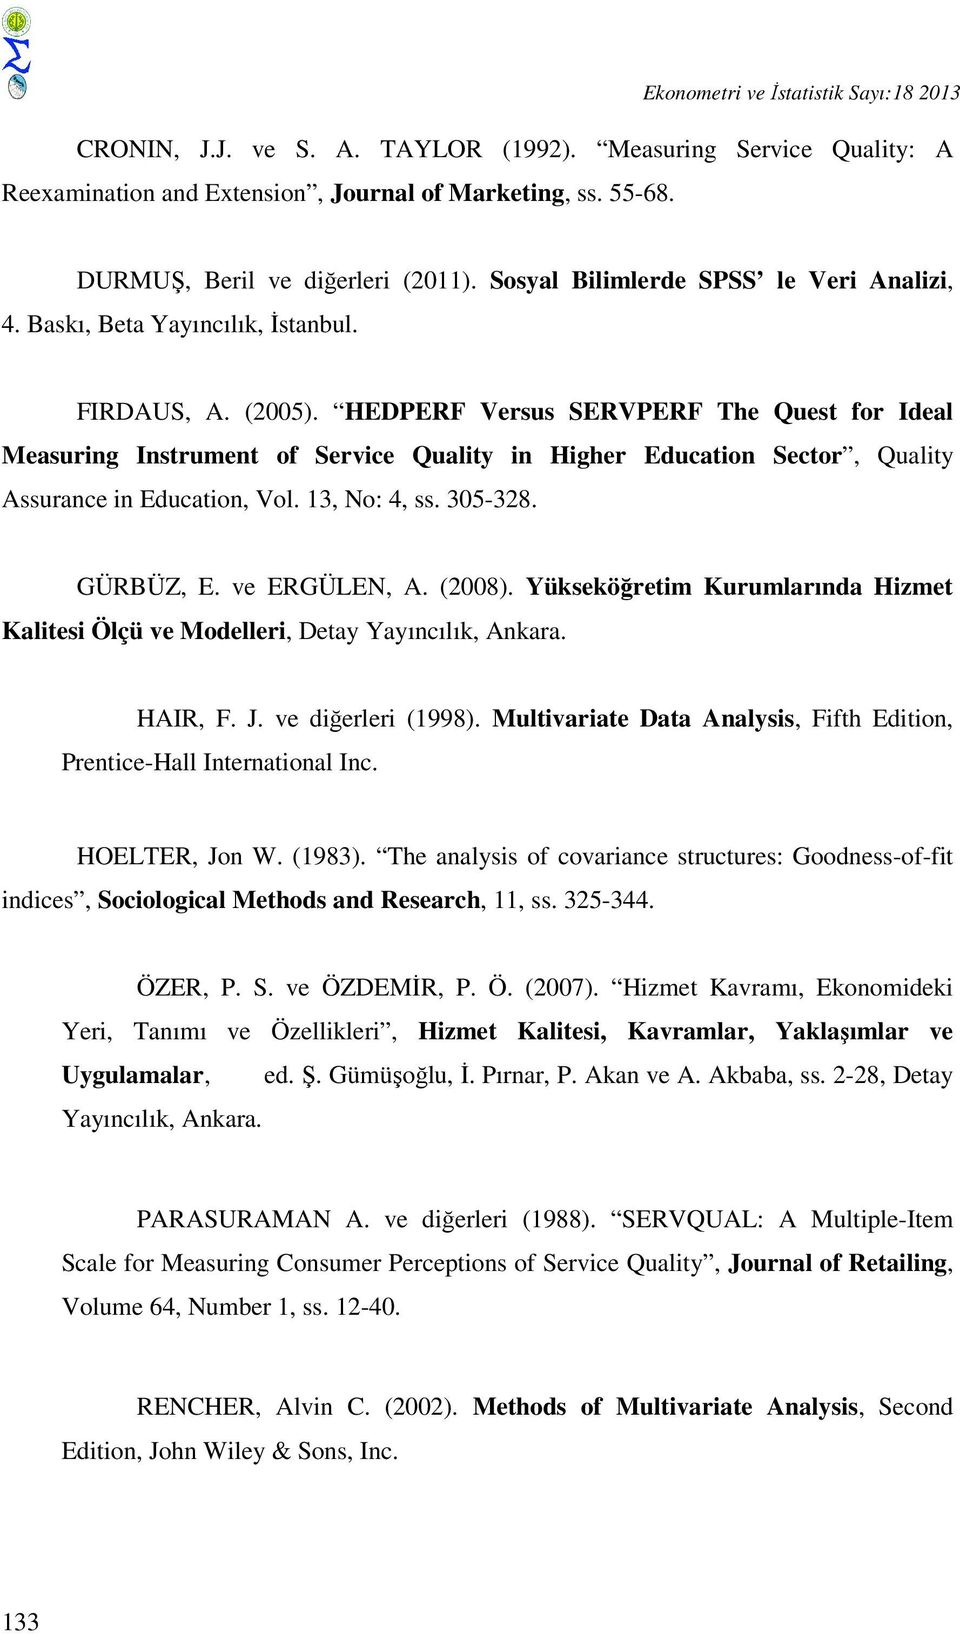 HEDPERF Versus SERVPERF The Quest for Ideal Measuring Instrument of Service Quality in Higher Education Sector, Quality Assurance in Education, Vol. 13, No: 4, ss. 305-328. GÜRBÜZ, E. ve ERGÜLEN, A.